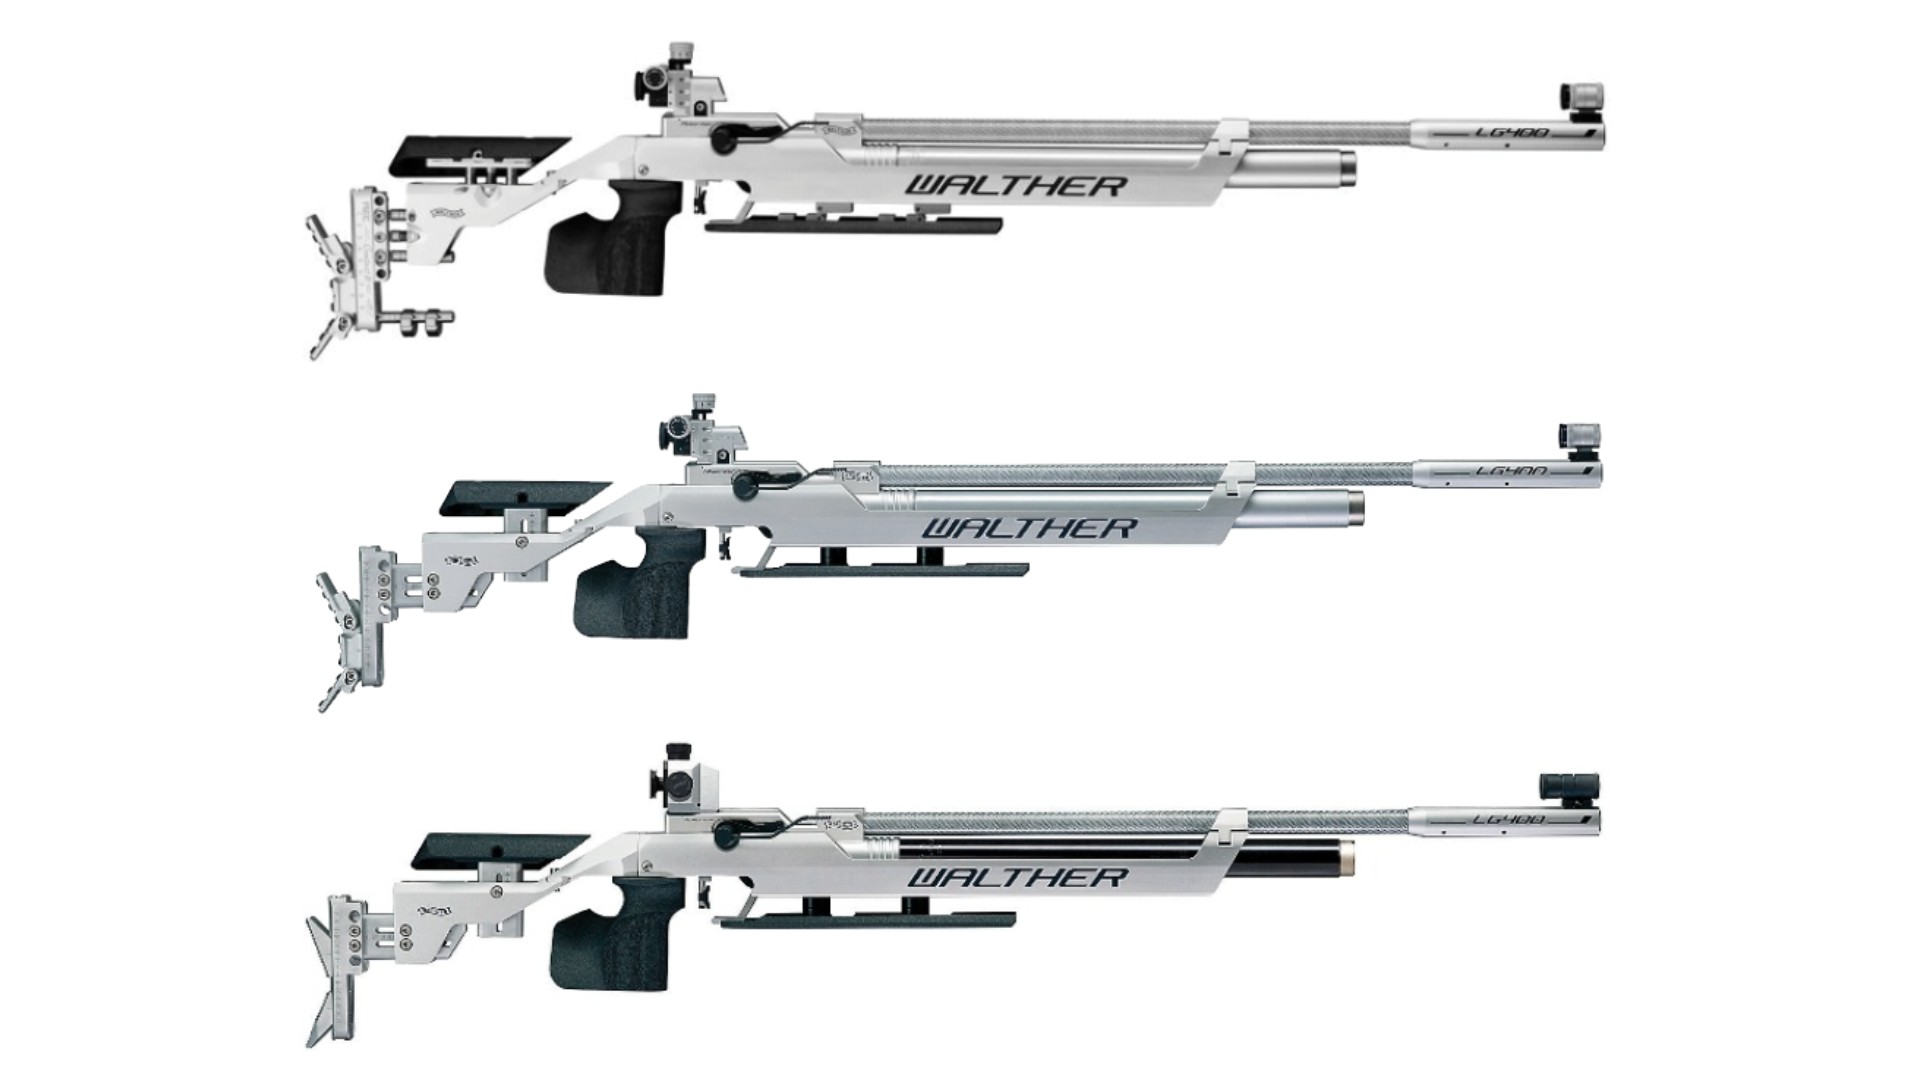 Walther LG400 models